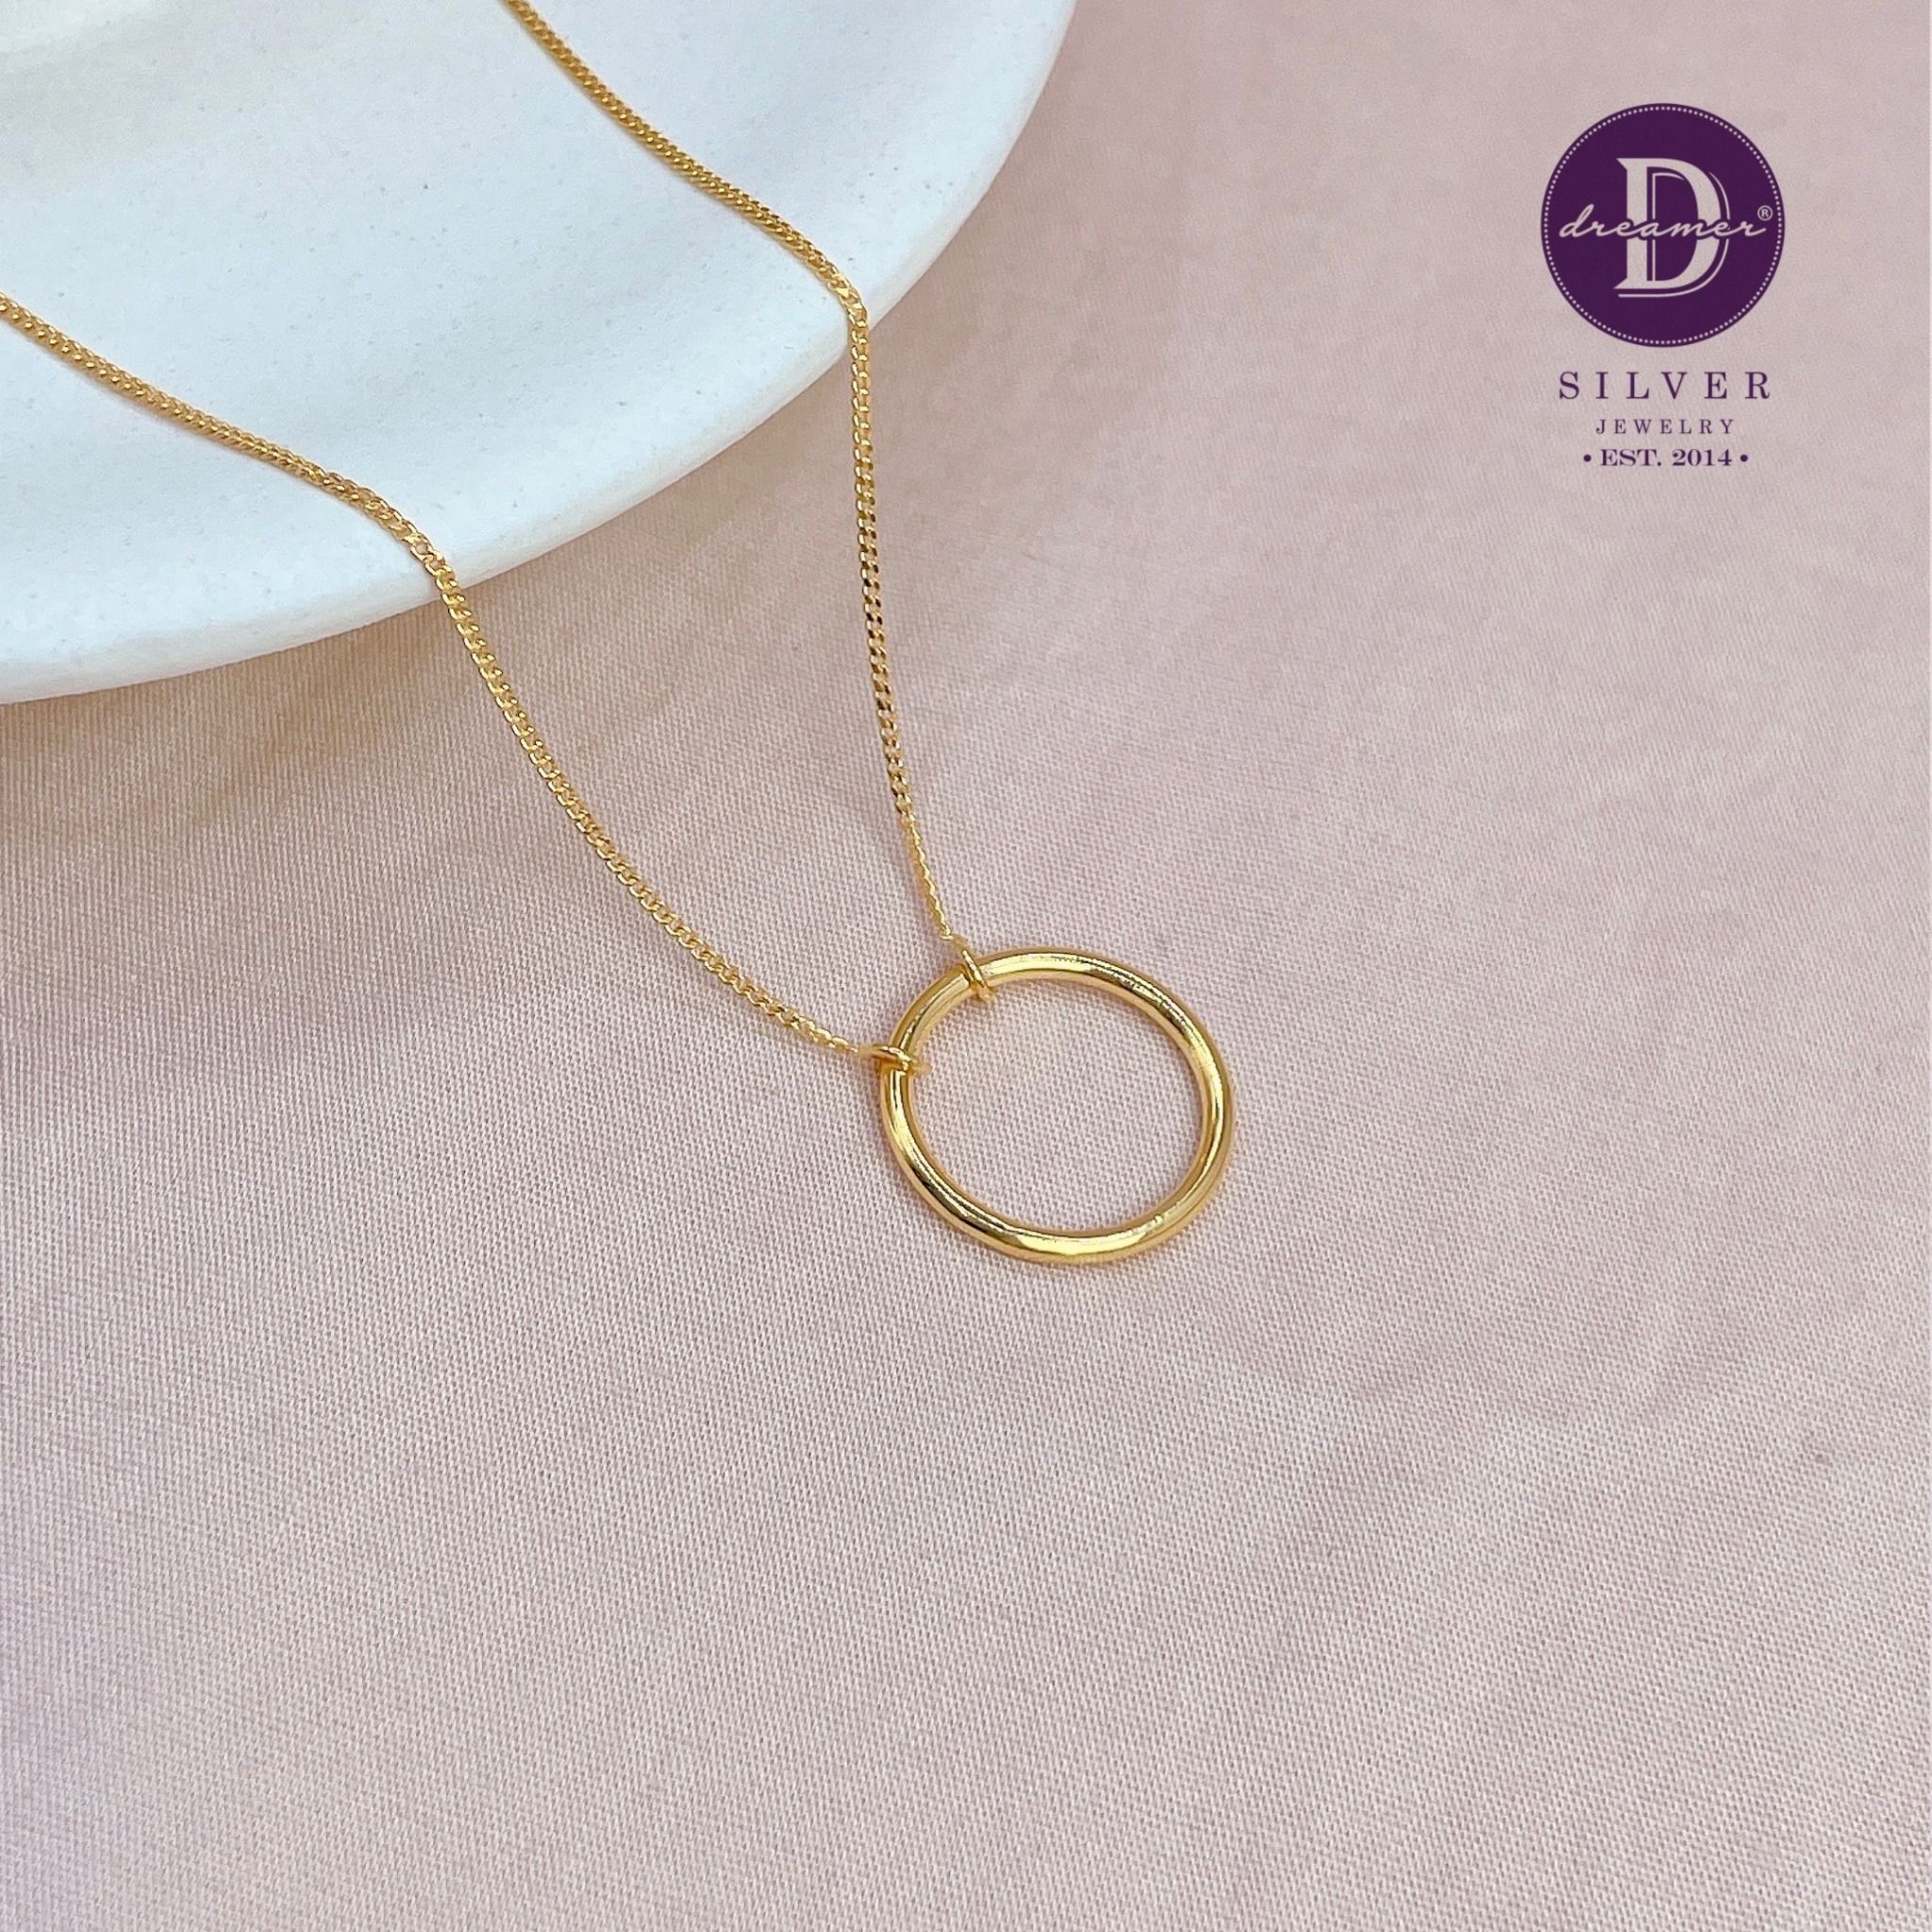  Thick Basic Halo Sterling Silver Necklace - Gold Plated Necklace - Dây Chuyền Mặt Tròn Chỉ Tròn Dày 821DCT 